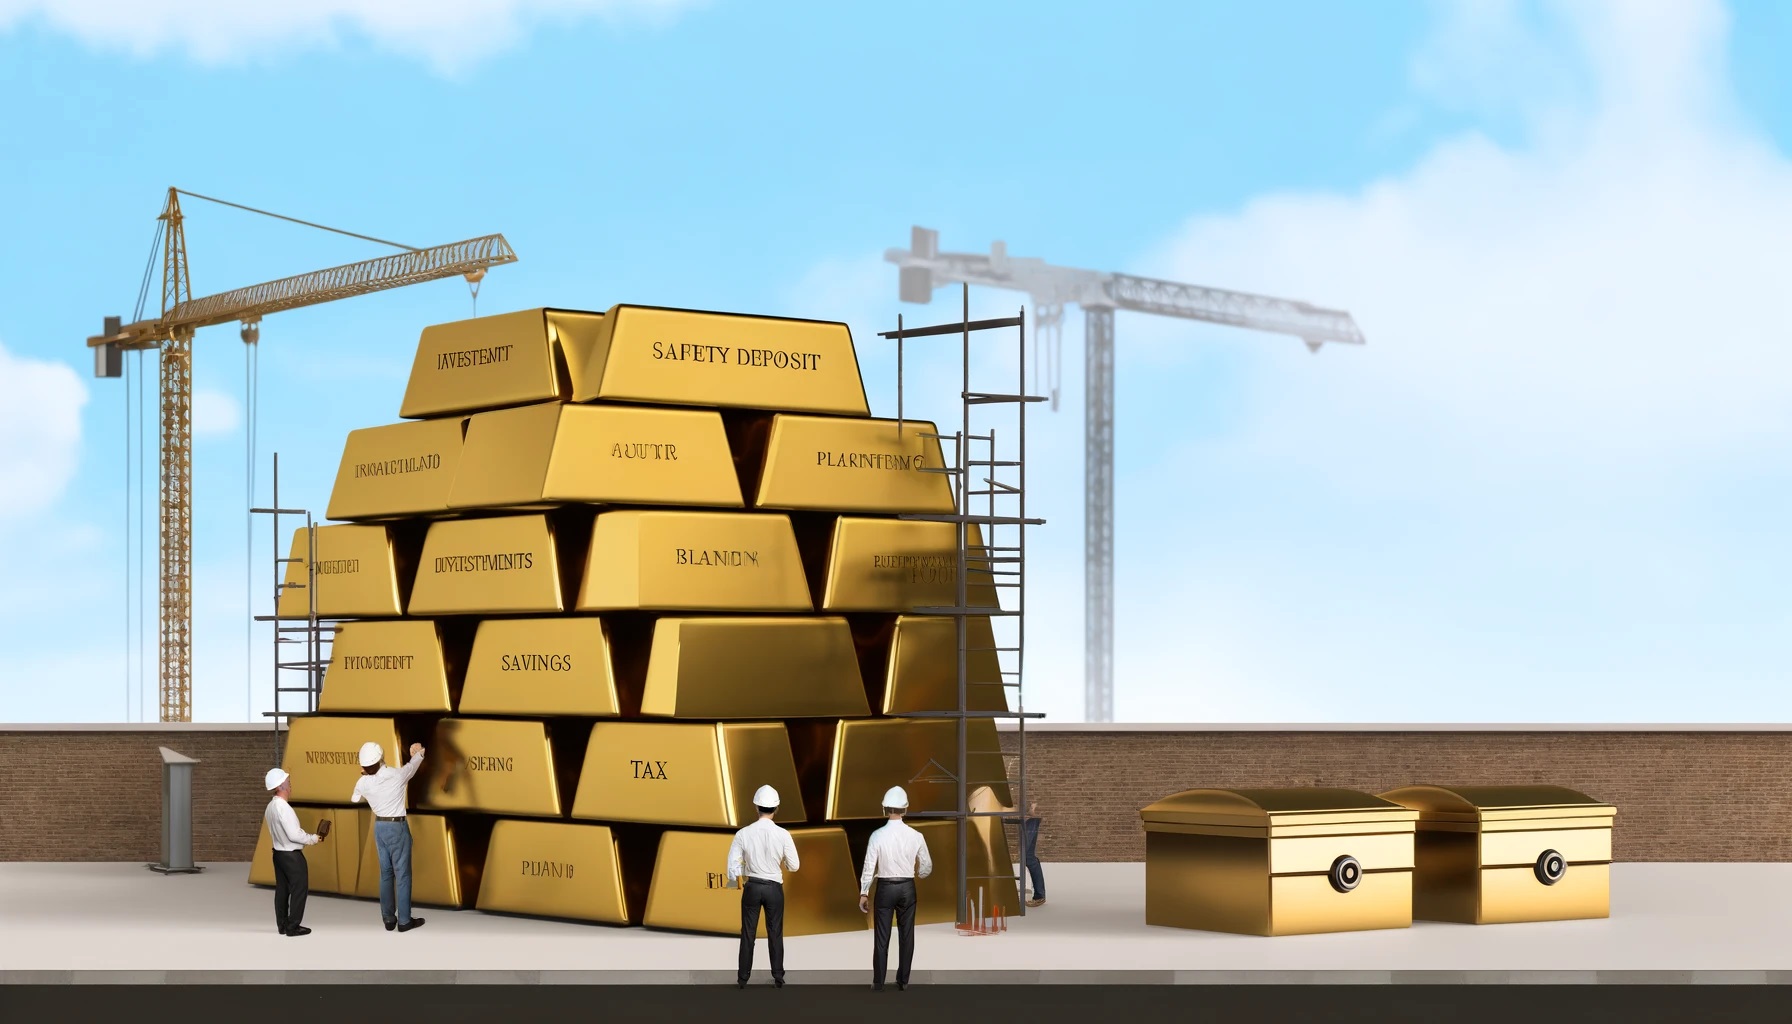 Construction workers building a structure with gold bars and safety deposit boxes representing financial building blocks.